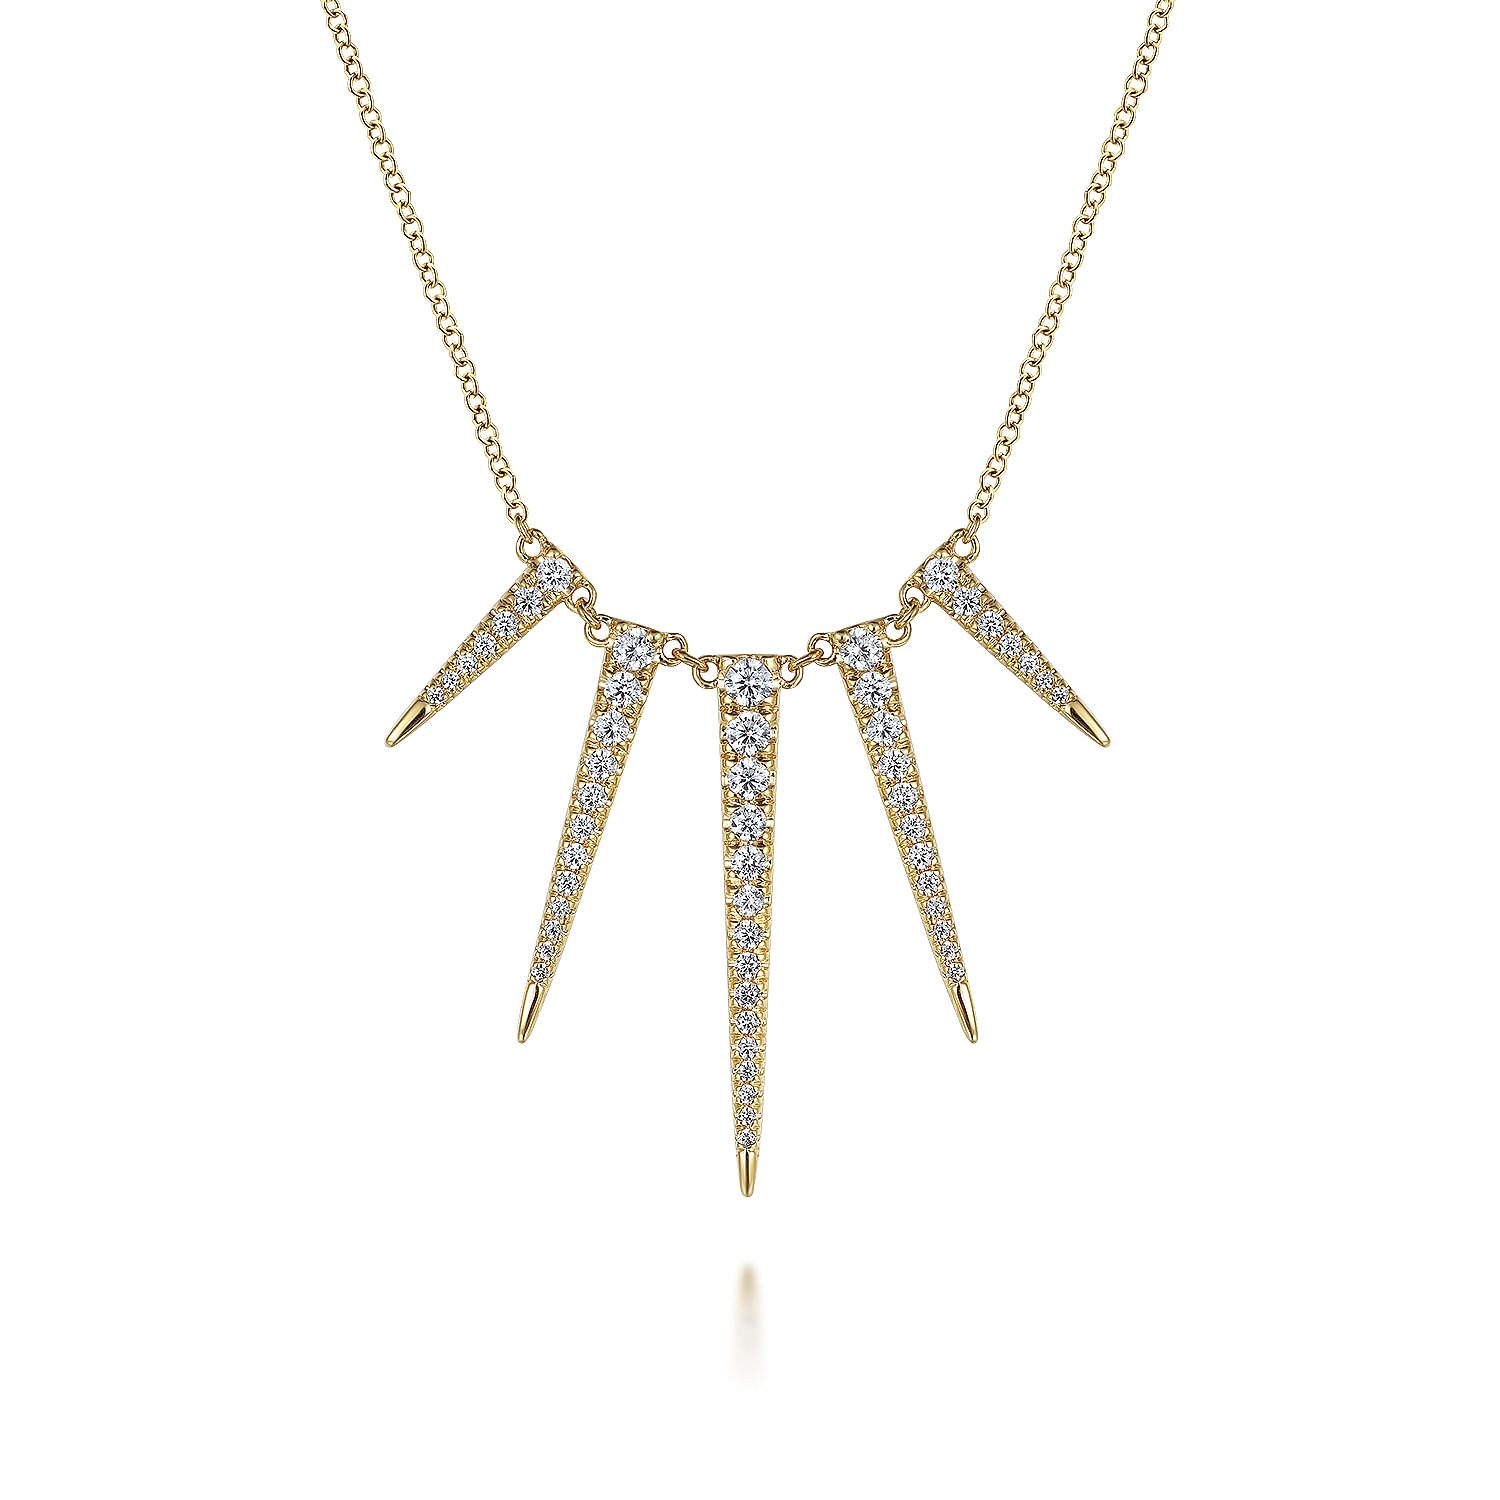 14K Yellow Gold Edgy Spikes Diamond Necklace